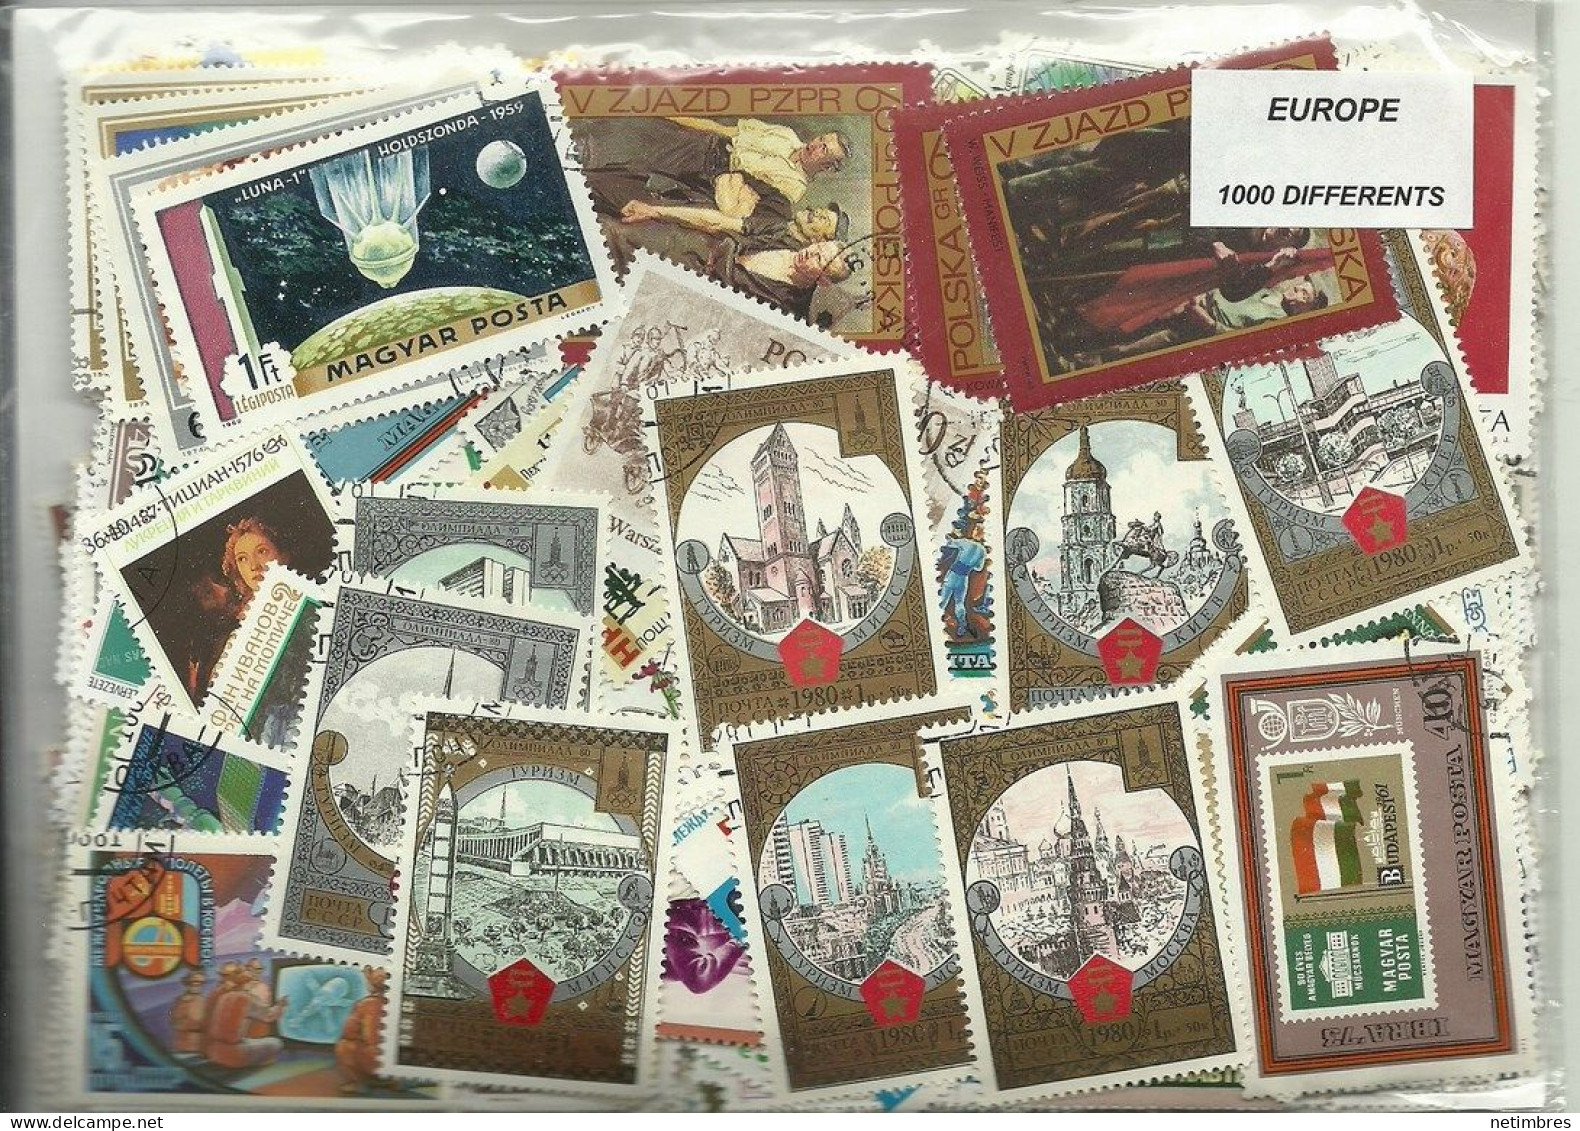 Lot 1000 Timbres D'Europe Diff - Lots & Kiloware (mixtures) - Min. 1000 Stamps